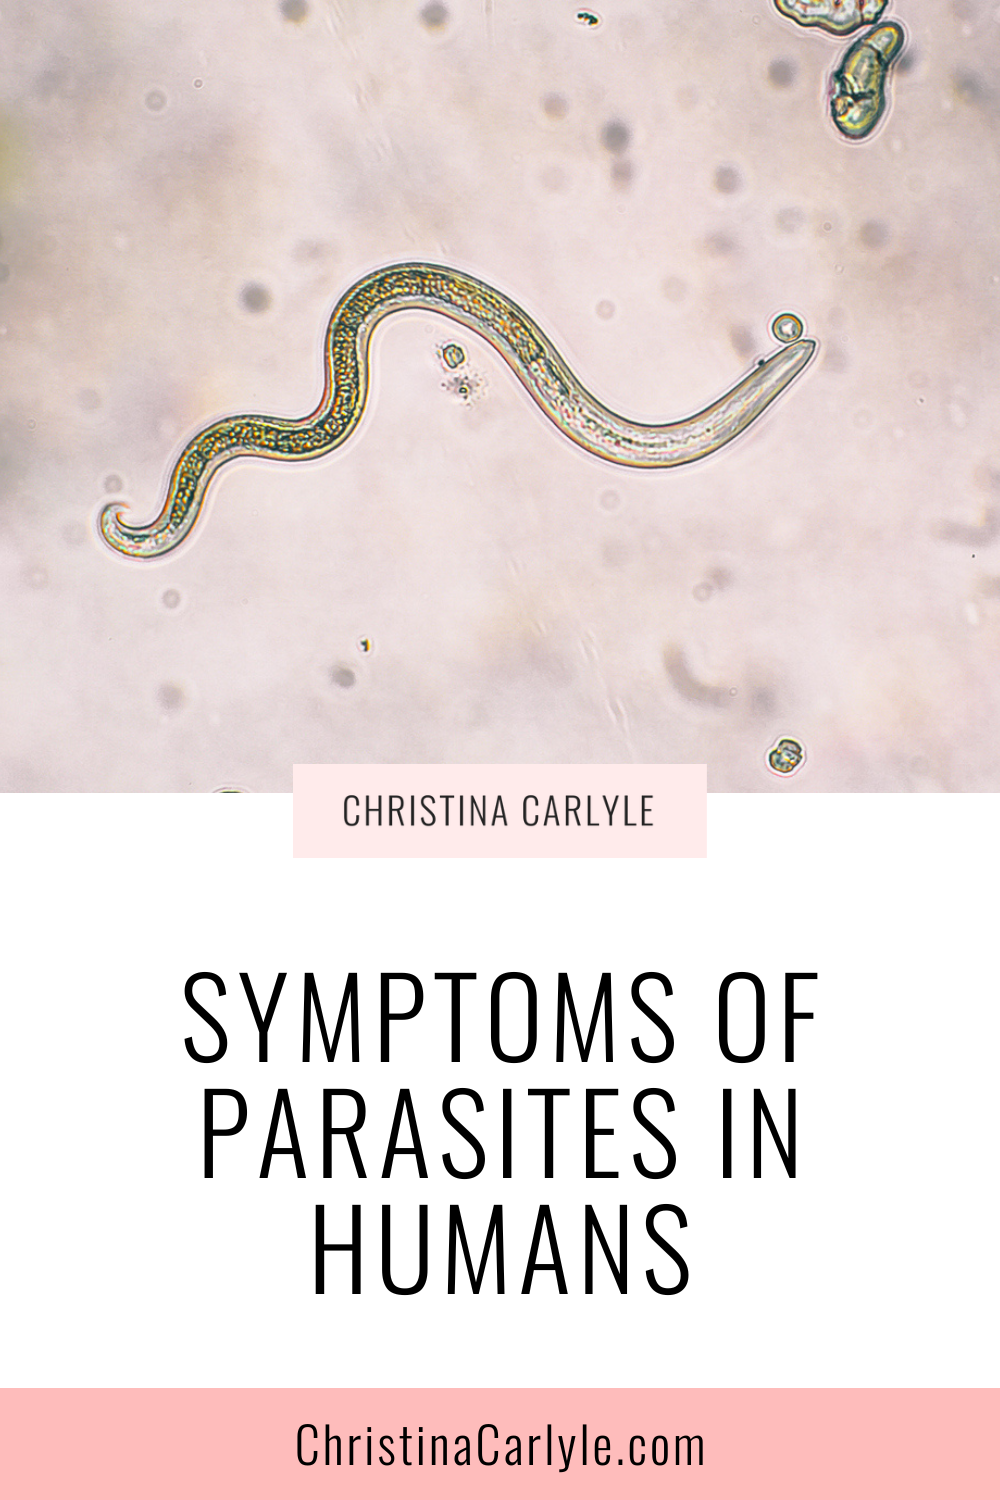 a picture of a parasite and text that says Symptoms of Parasites in Humans